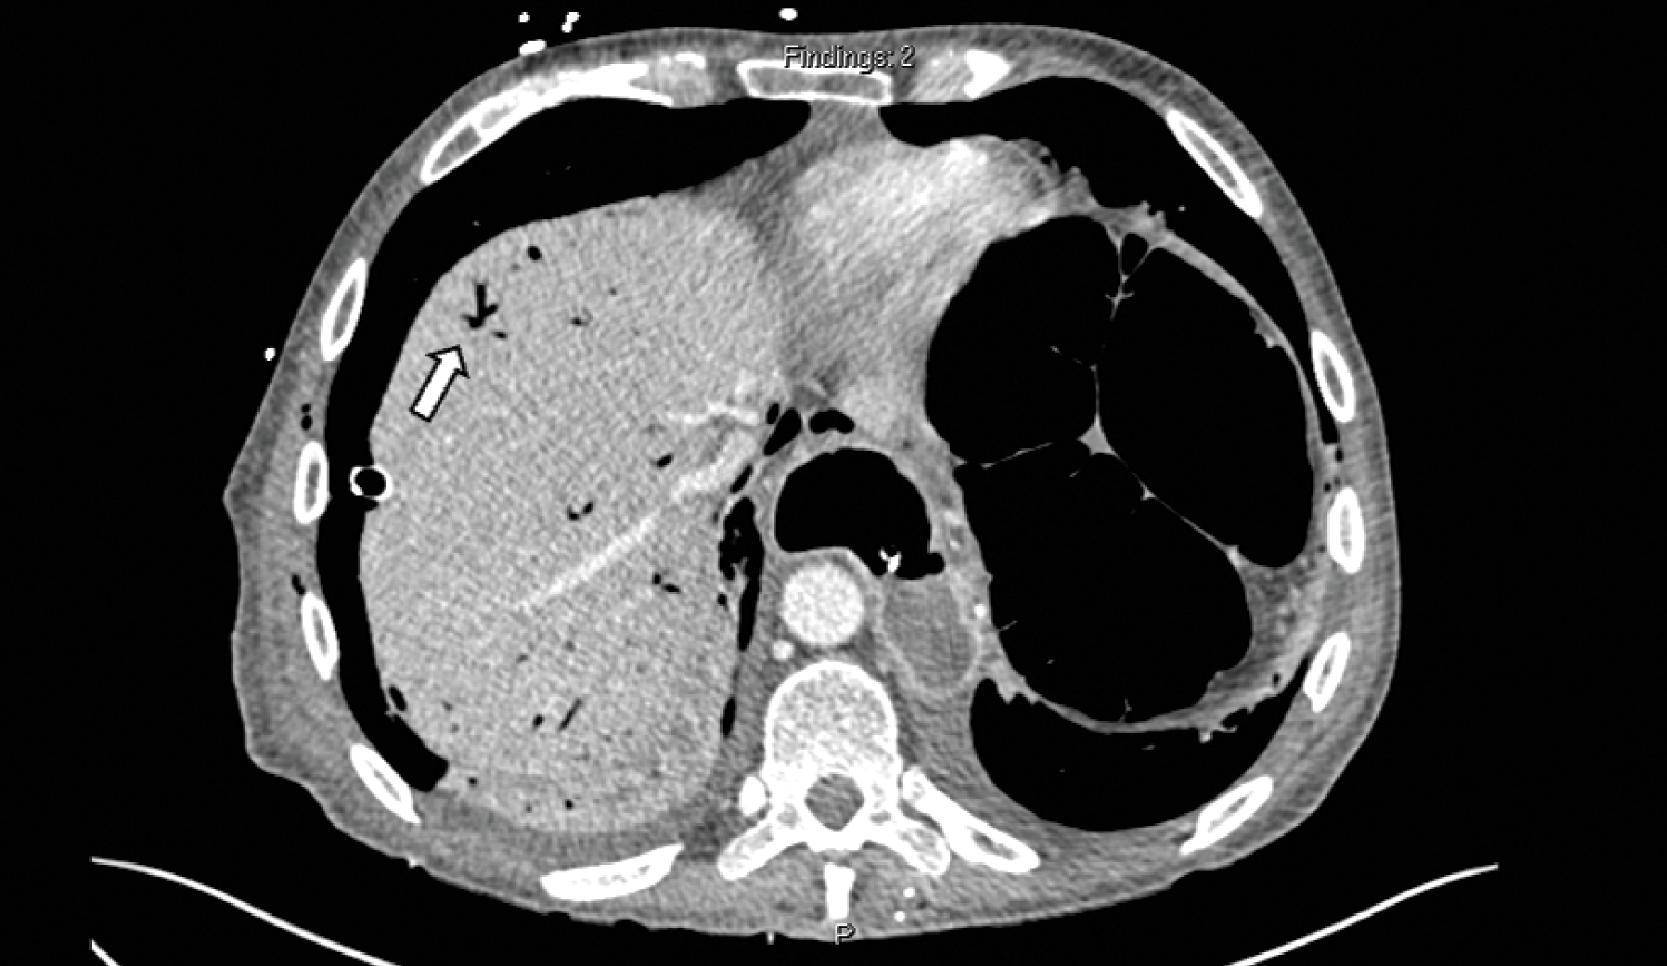 FIG. 2, Contrast enhanced axial CT image demonstrating foci of gas in the portal veins (arrow). Peripherally branching air on CT helps differentiating portal venous gas from pneumobilia, which typically is more central. Significant bowel distention is also noted.